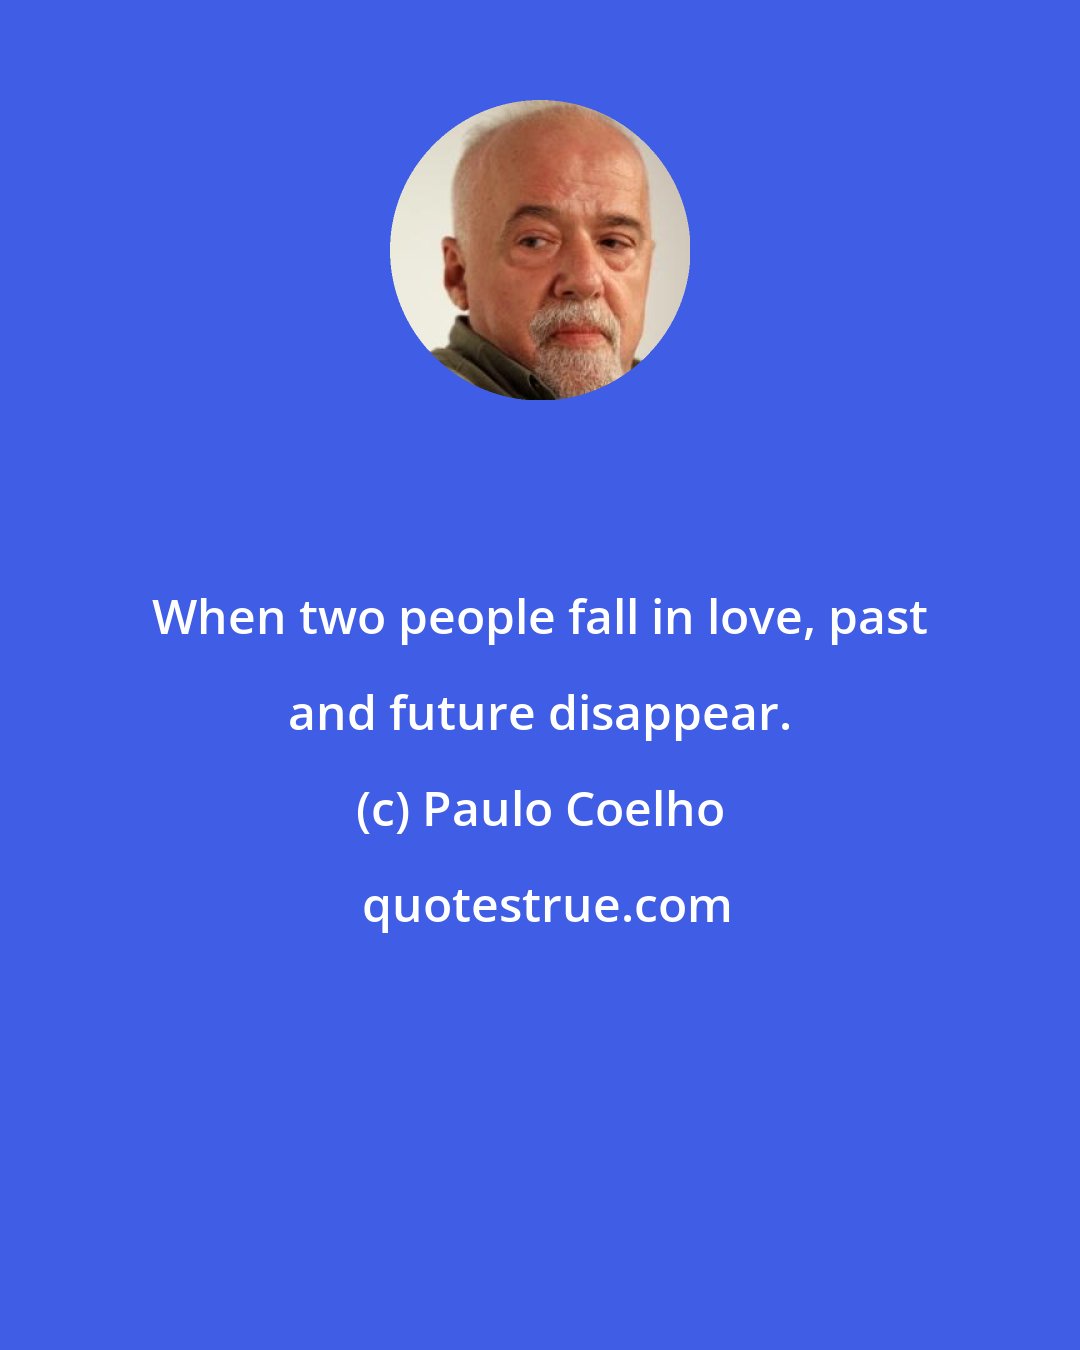 Paulo Coelho: When two people fall in love, past and future disappear.